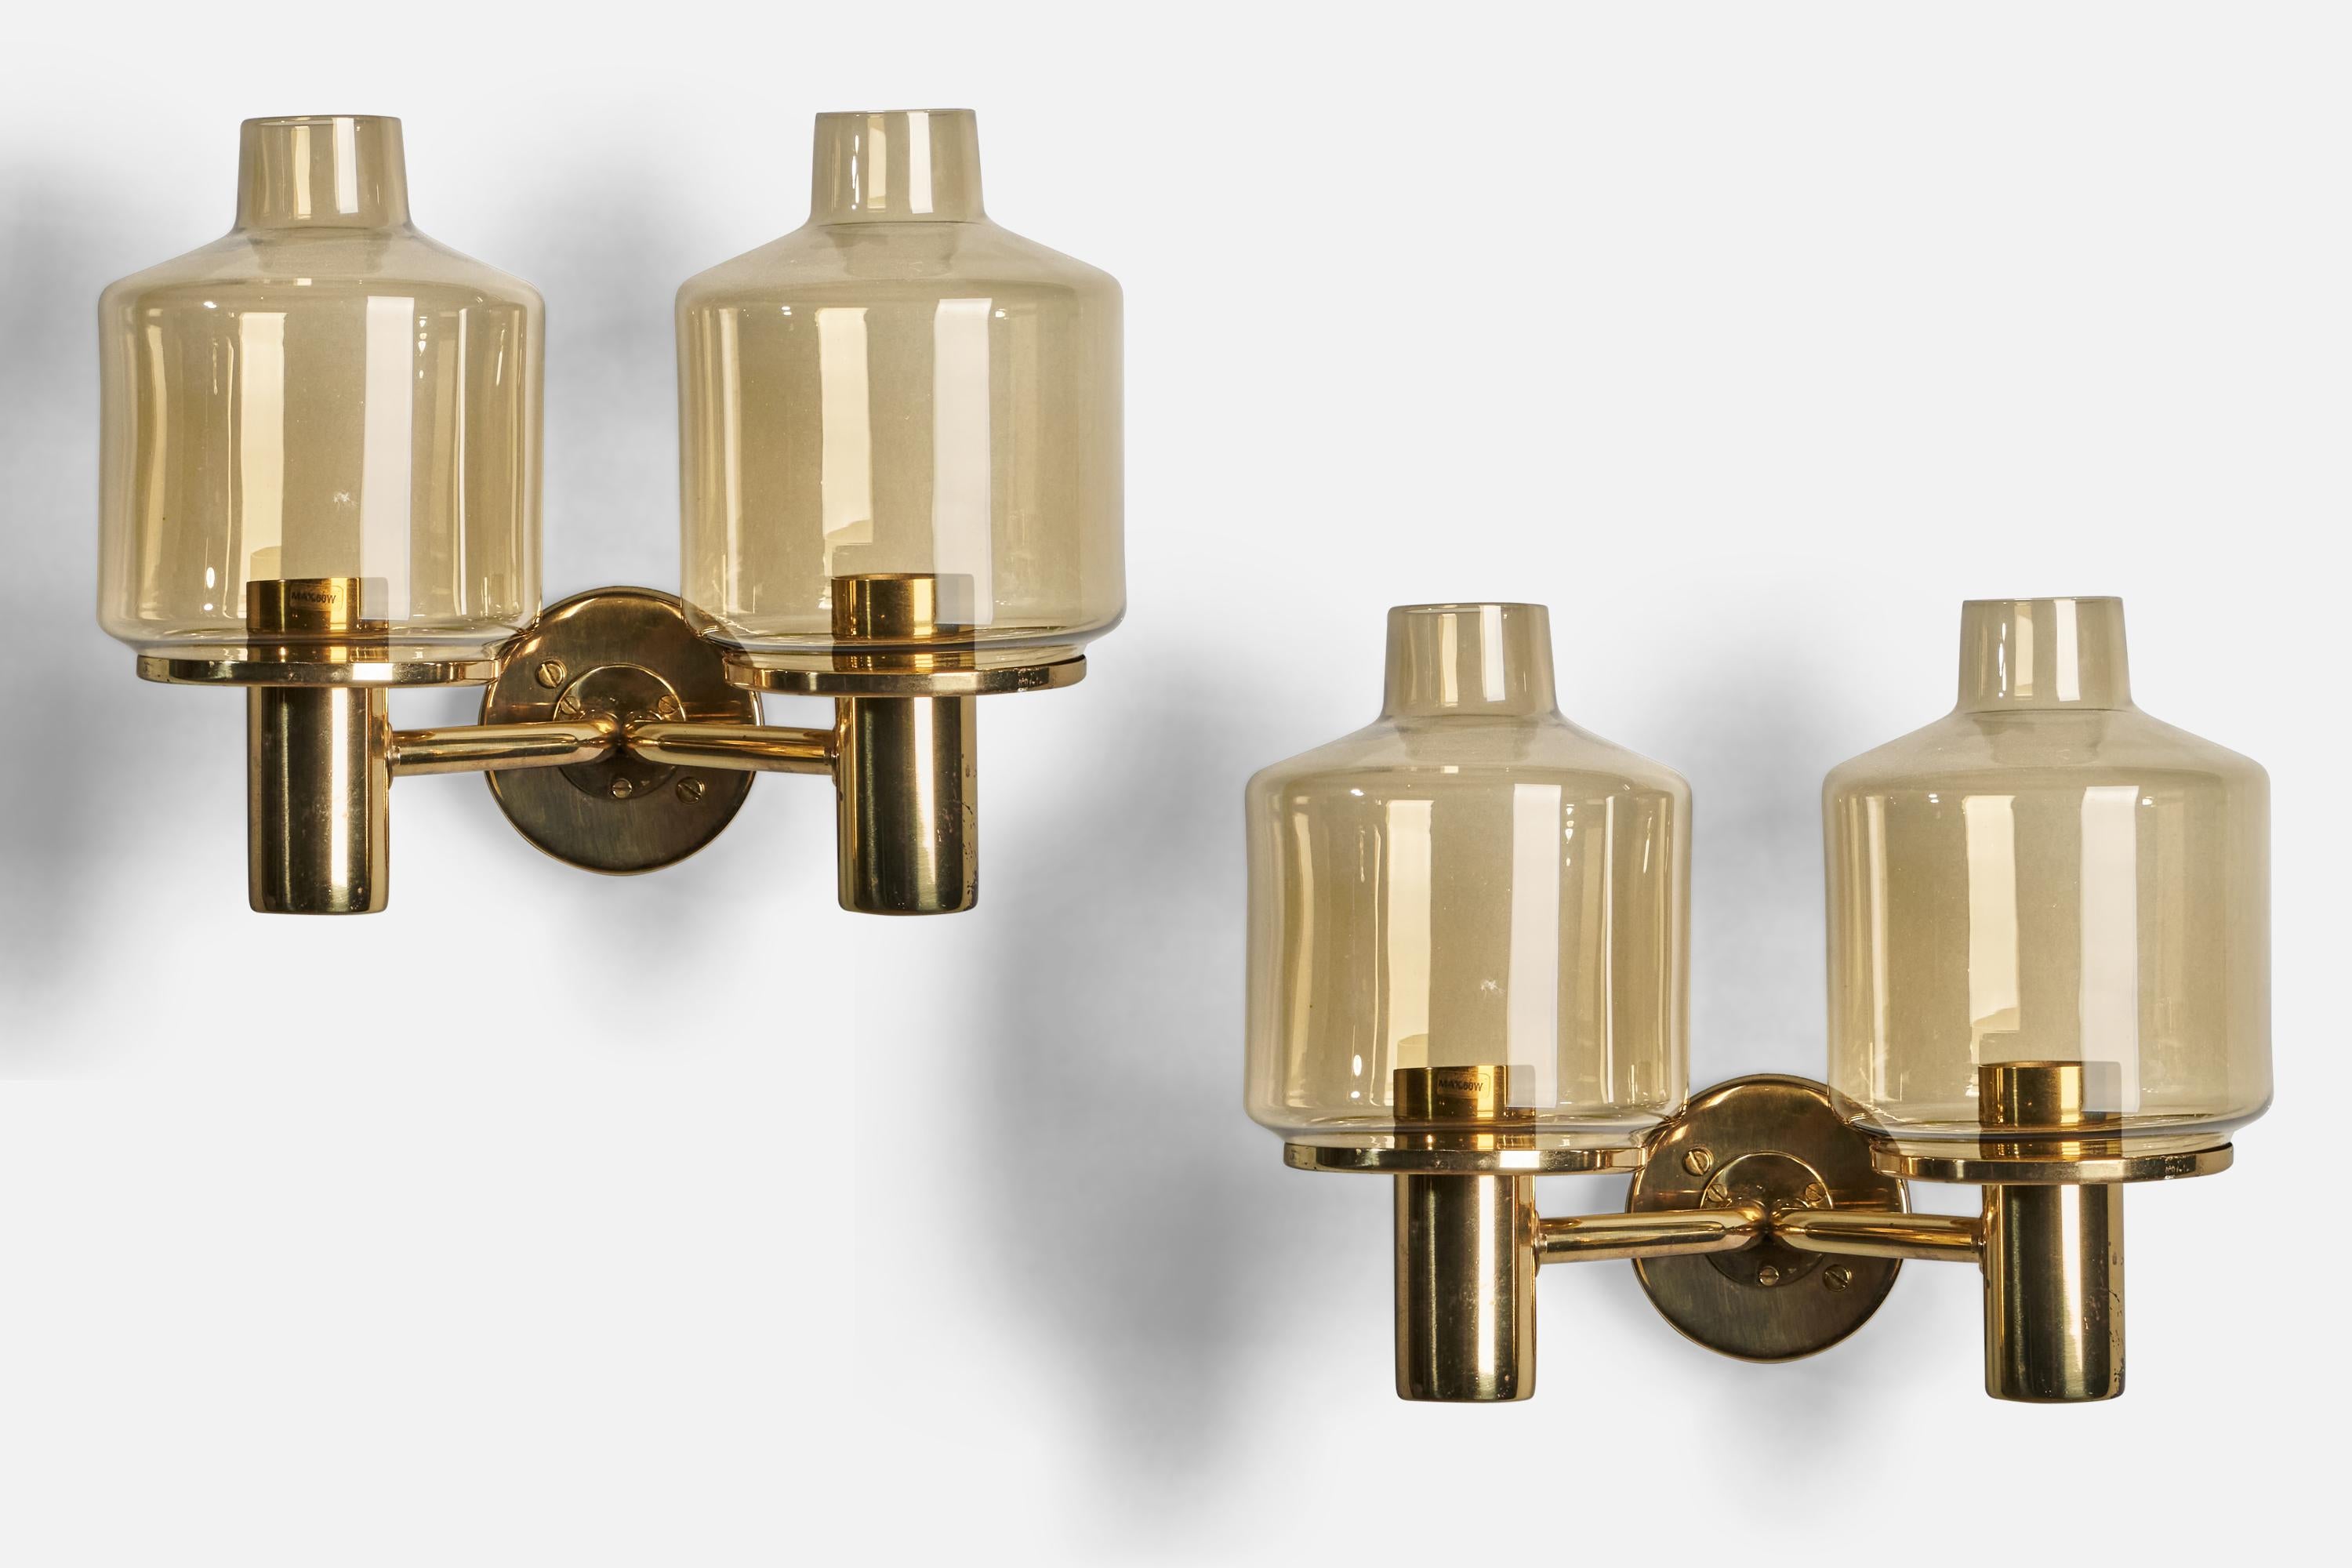 A pair of two-armed brass and yellow-coloured glass wall lights designed and produced in Sweden, 1970s.

Overall Dimensions (inches): 11.5” H x 14” W x 9.25” D
Back Plate Dimensions (inches): 4” Diameter
Bulb Specifications: E-26 Bulb
Number of